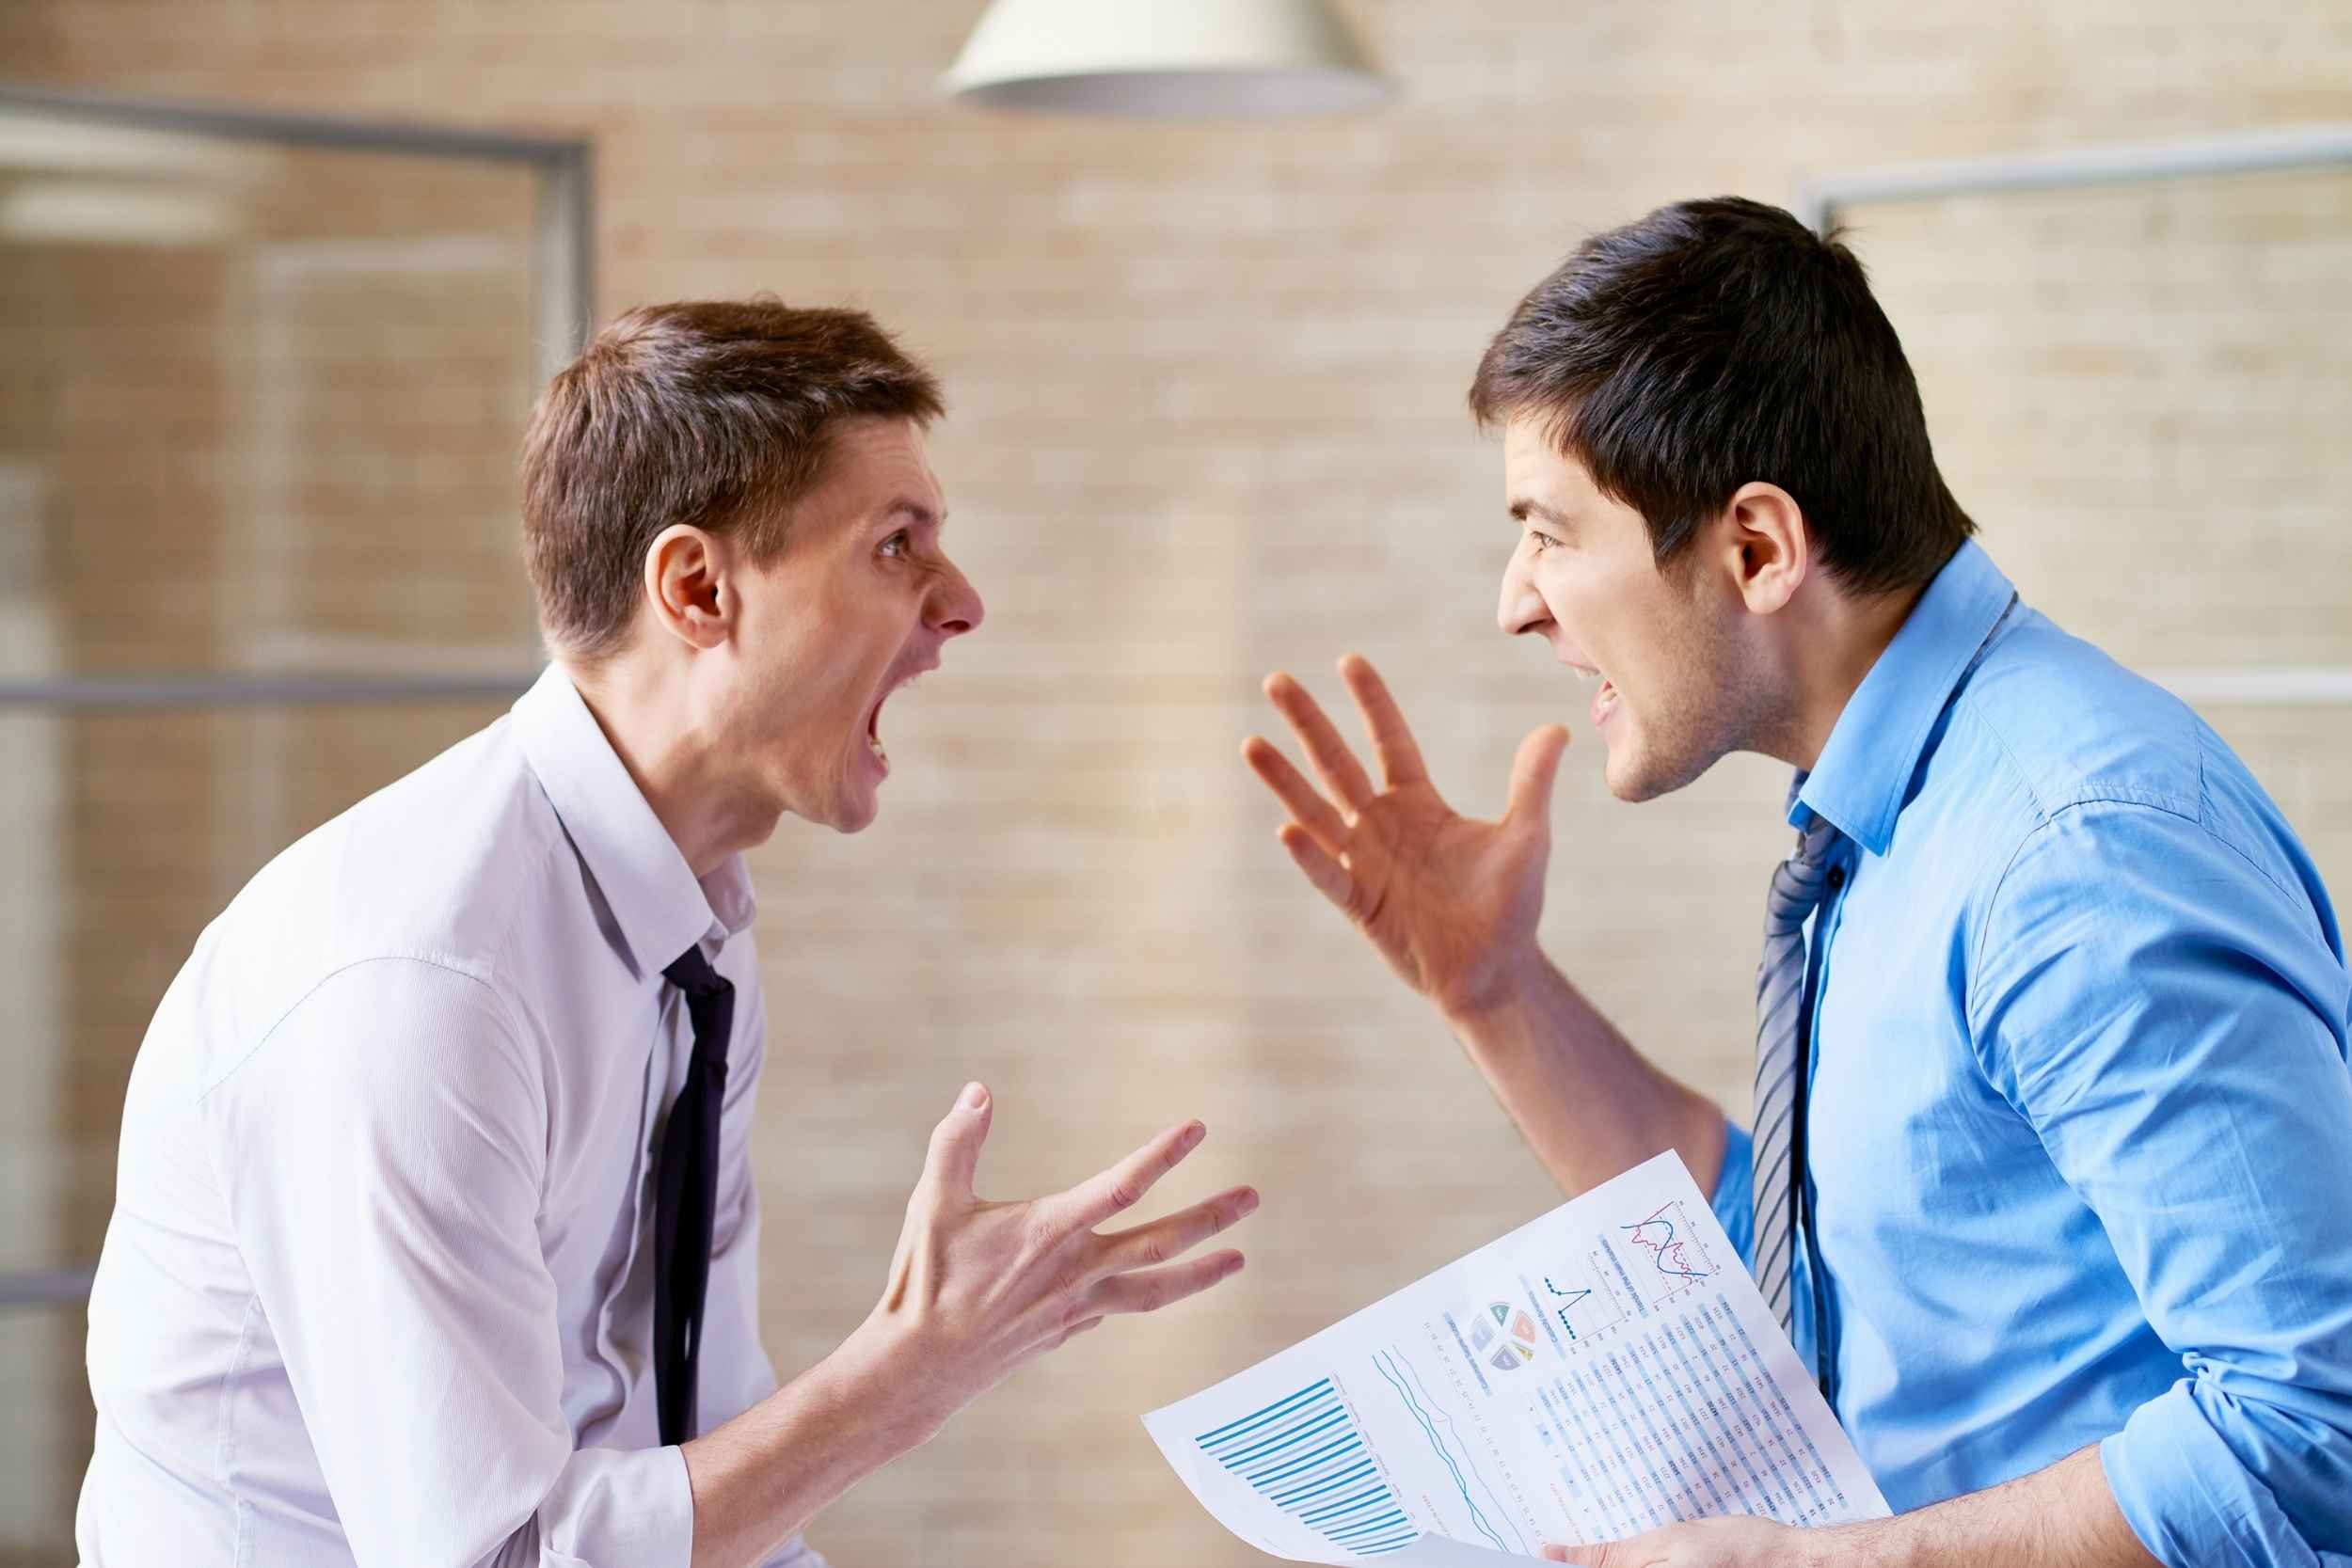 Two men are arguing in an office, one is holding a report with data, graphs and pie charts. Both men are gesturing with their hands and it's clear that there is conflict between them